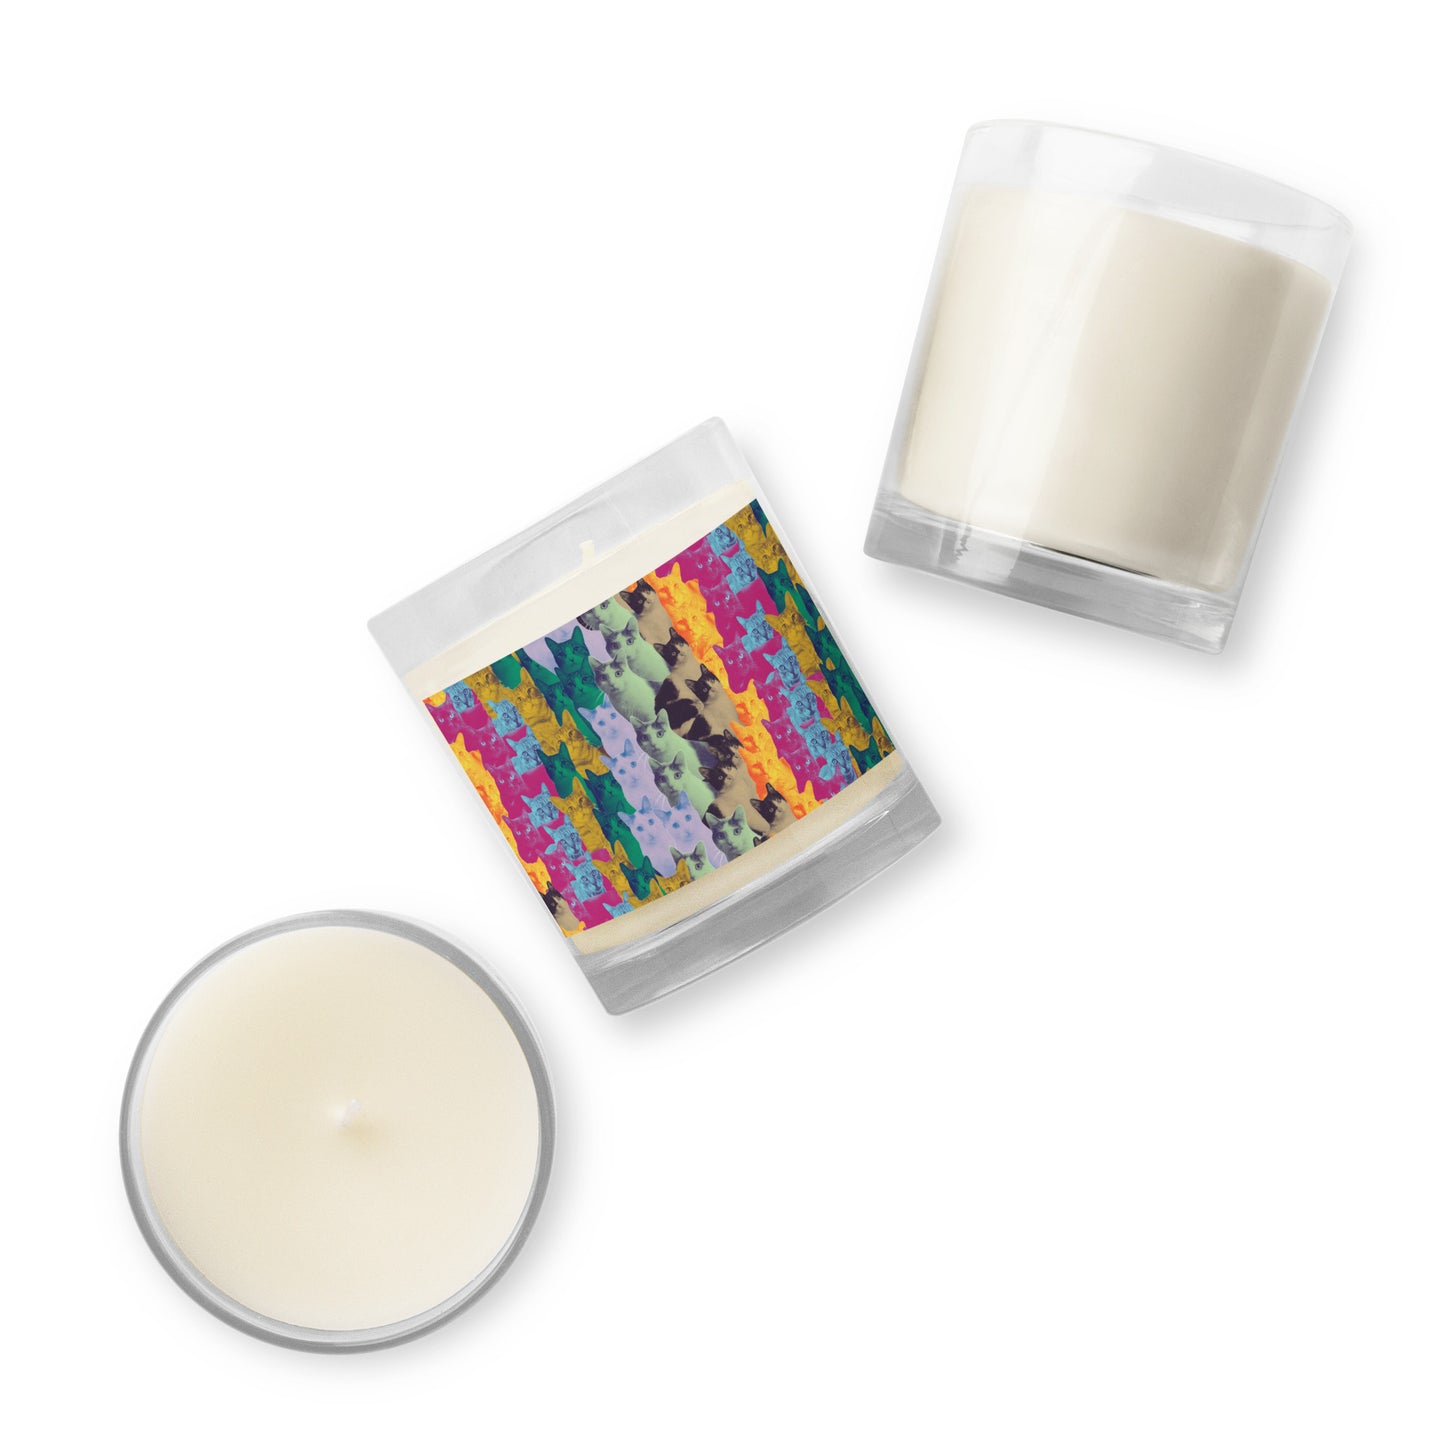 GOOD CAT -  Rainbow Rescue/White Light for Flight Soy Wax Candle